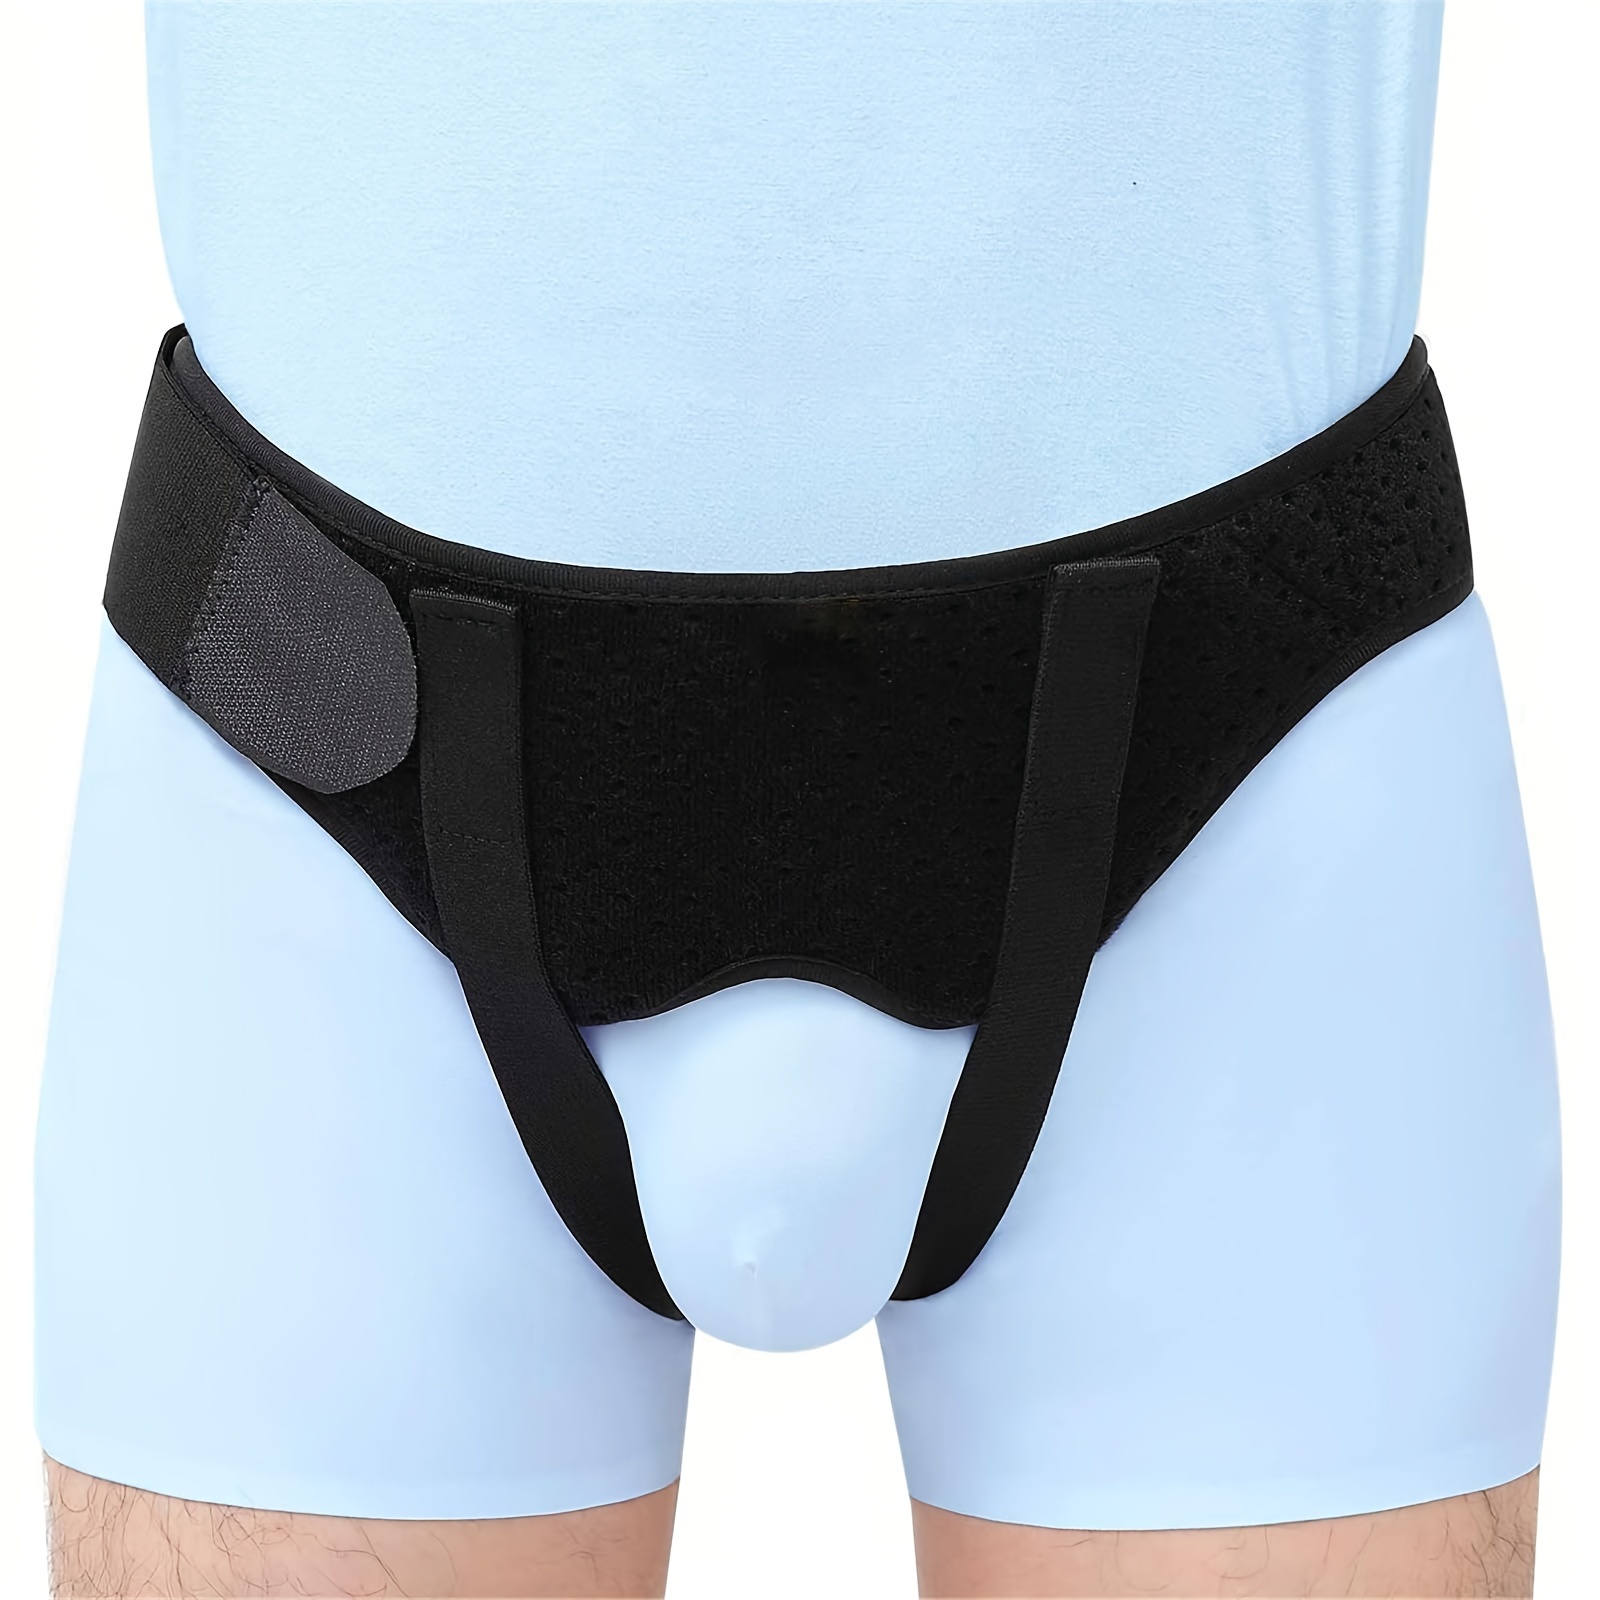 Umbilical Hernia Belt for Men and Women - Abdominal Support Binder with  Compression Pad - for Incisional, Epigastric, Ventral, Inguinal Hernia -  Belly